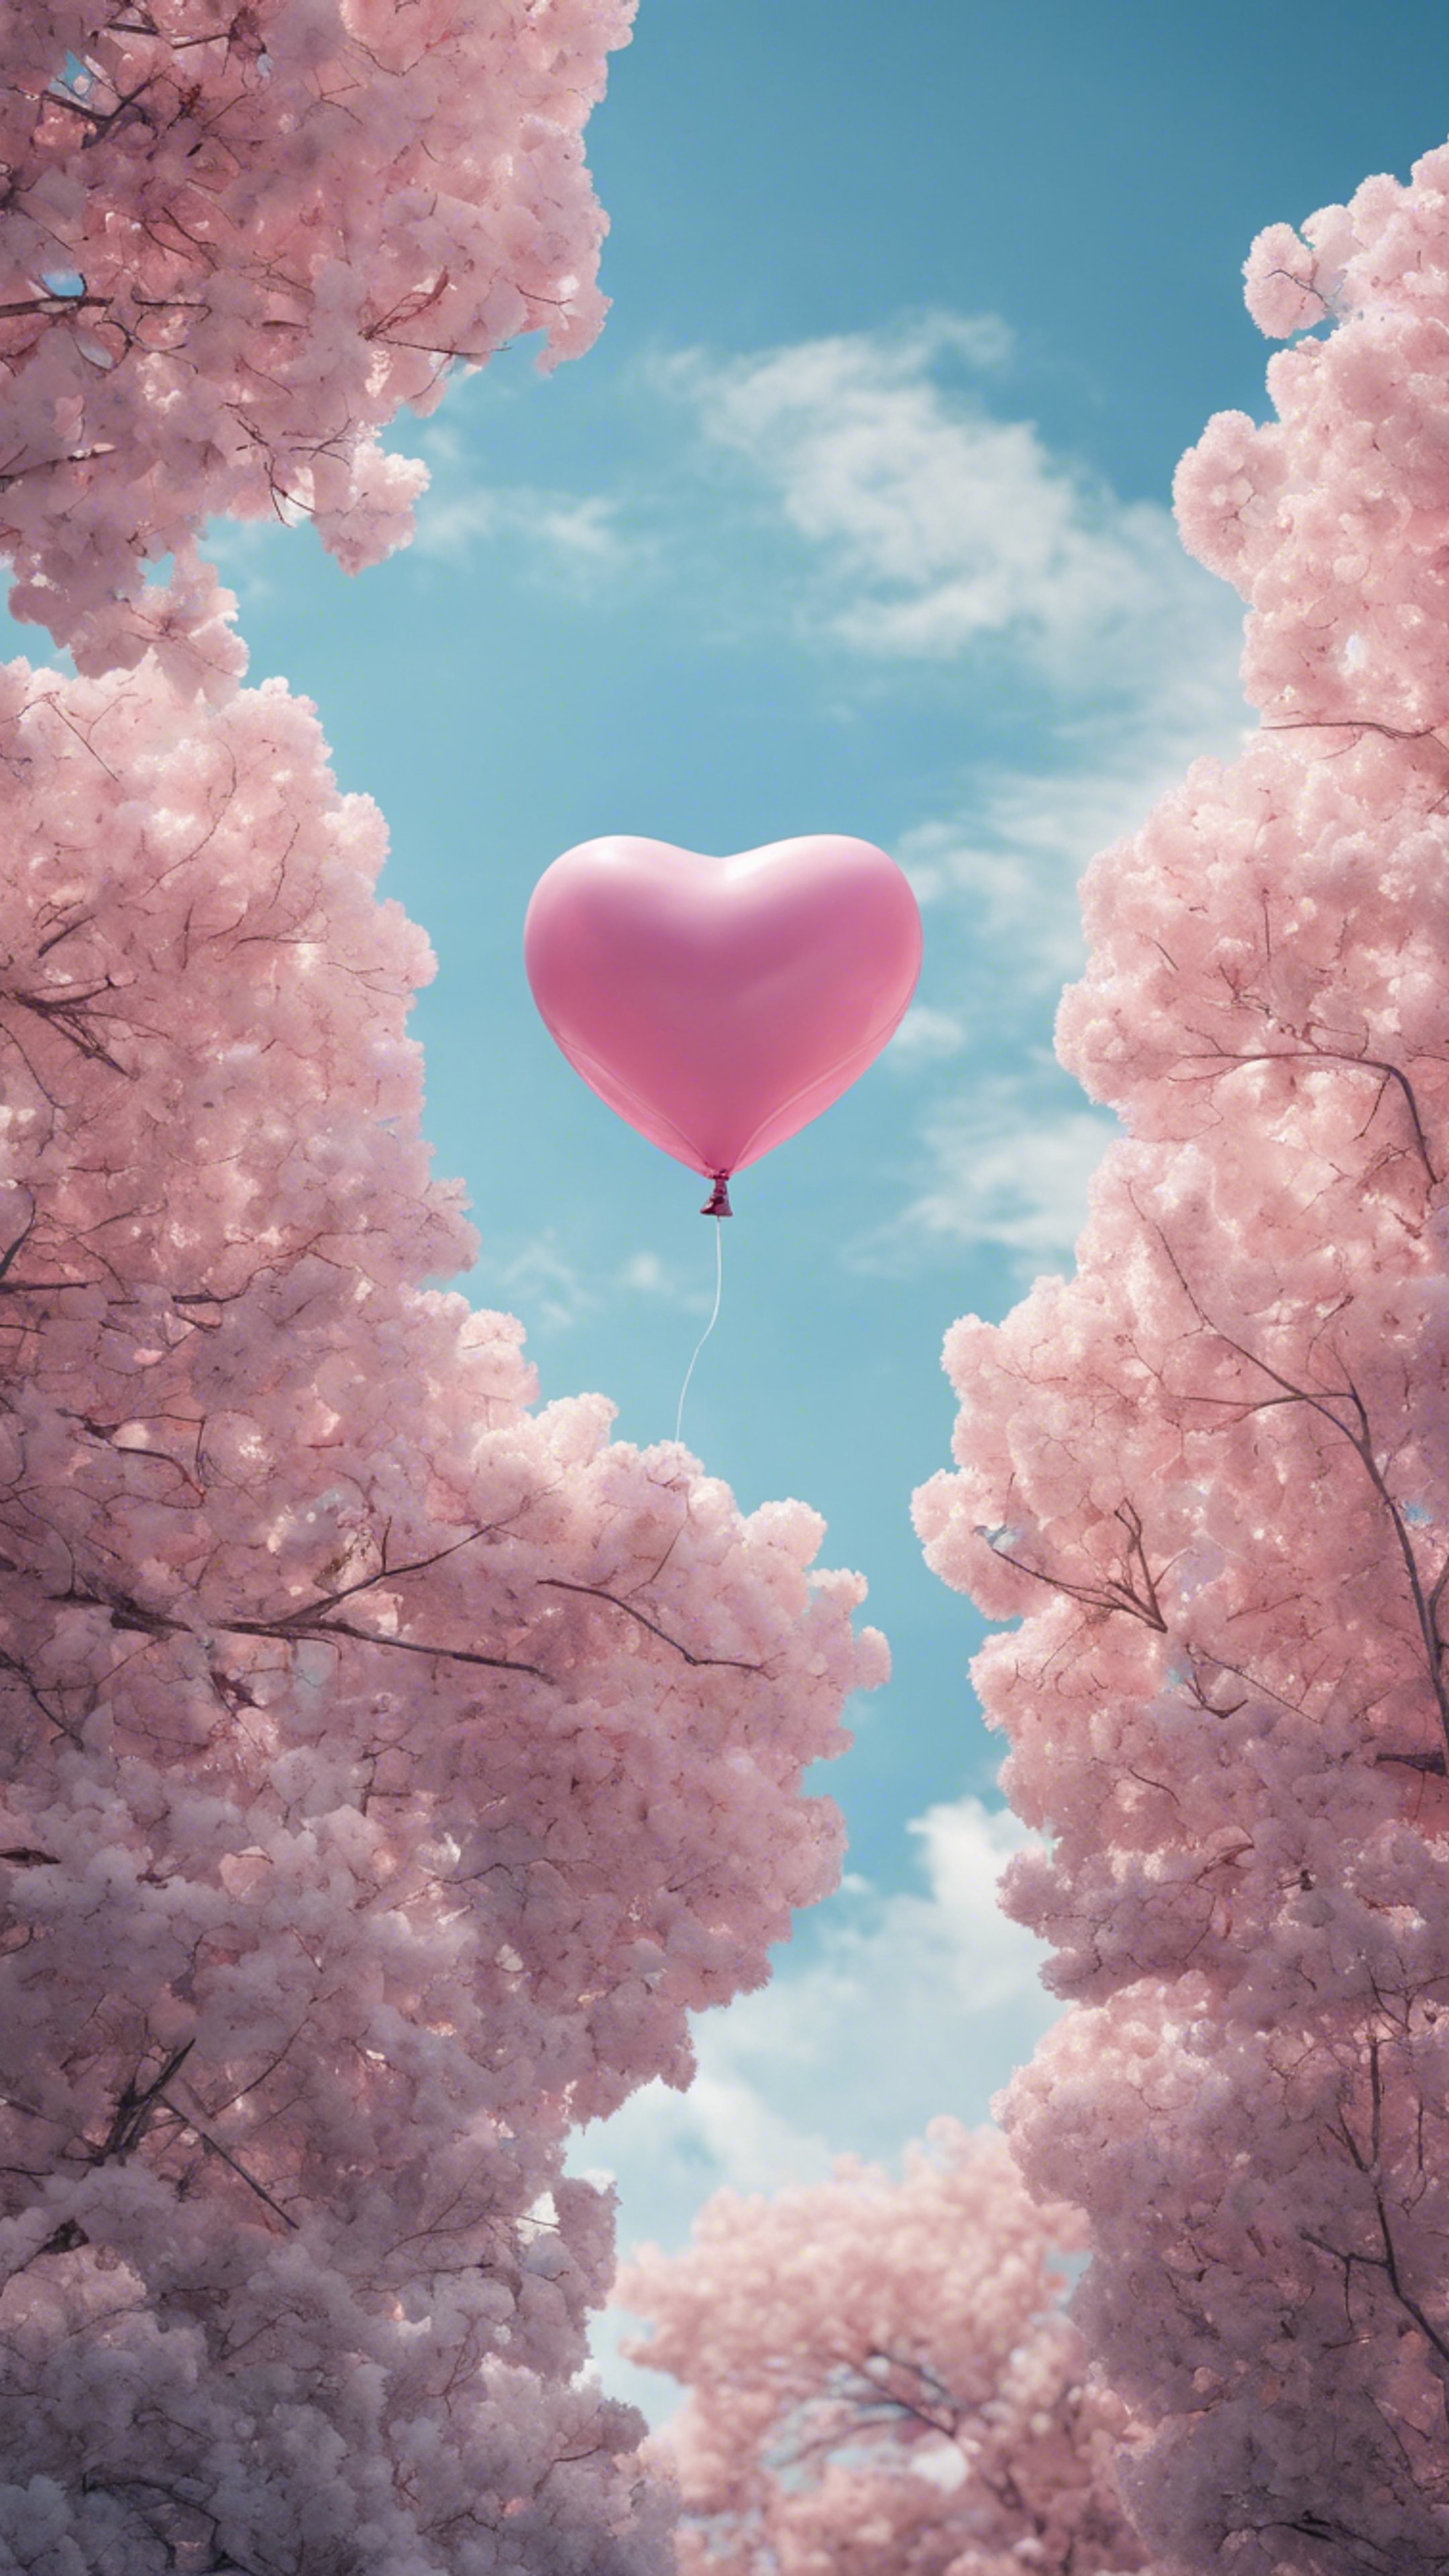 A pink heart-shaped balloon floating in the blue sky. Tapeta[cd7c71404dc64bc7bb7c]